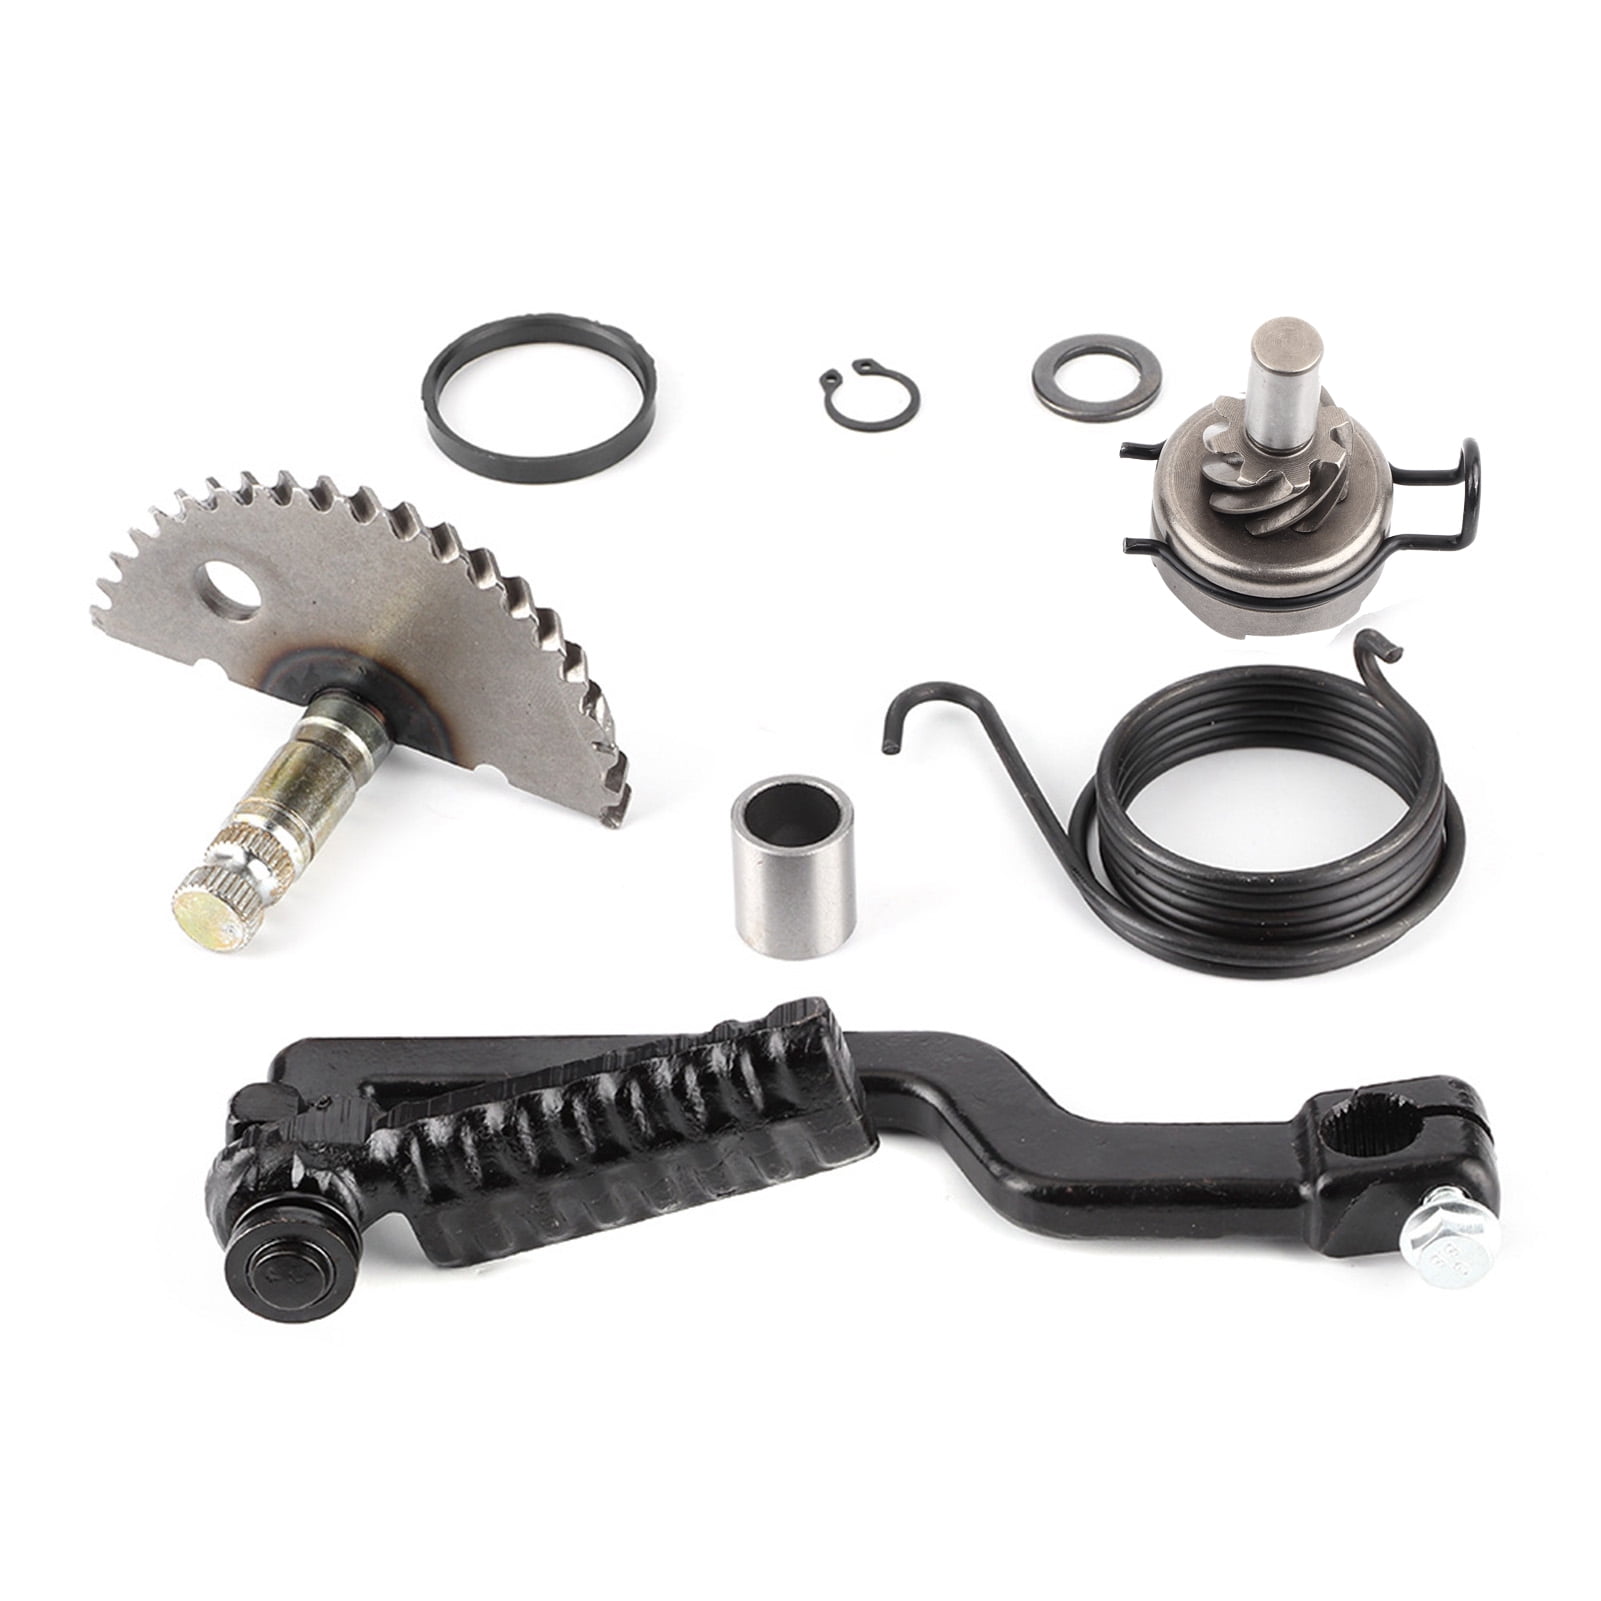 Kick Start Gear Shaft Rebuild Kit Gear with clip Spring for GY6 50cc-100cc Motors Scooter 